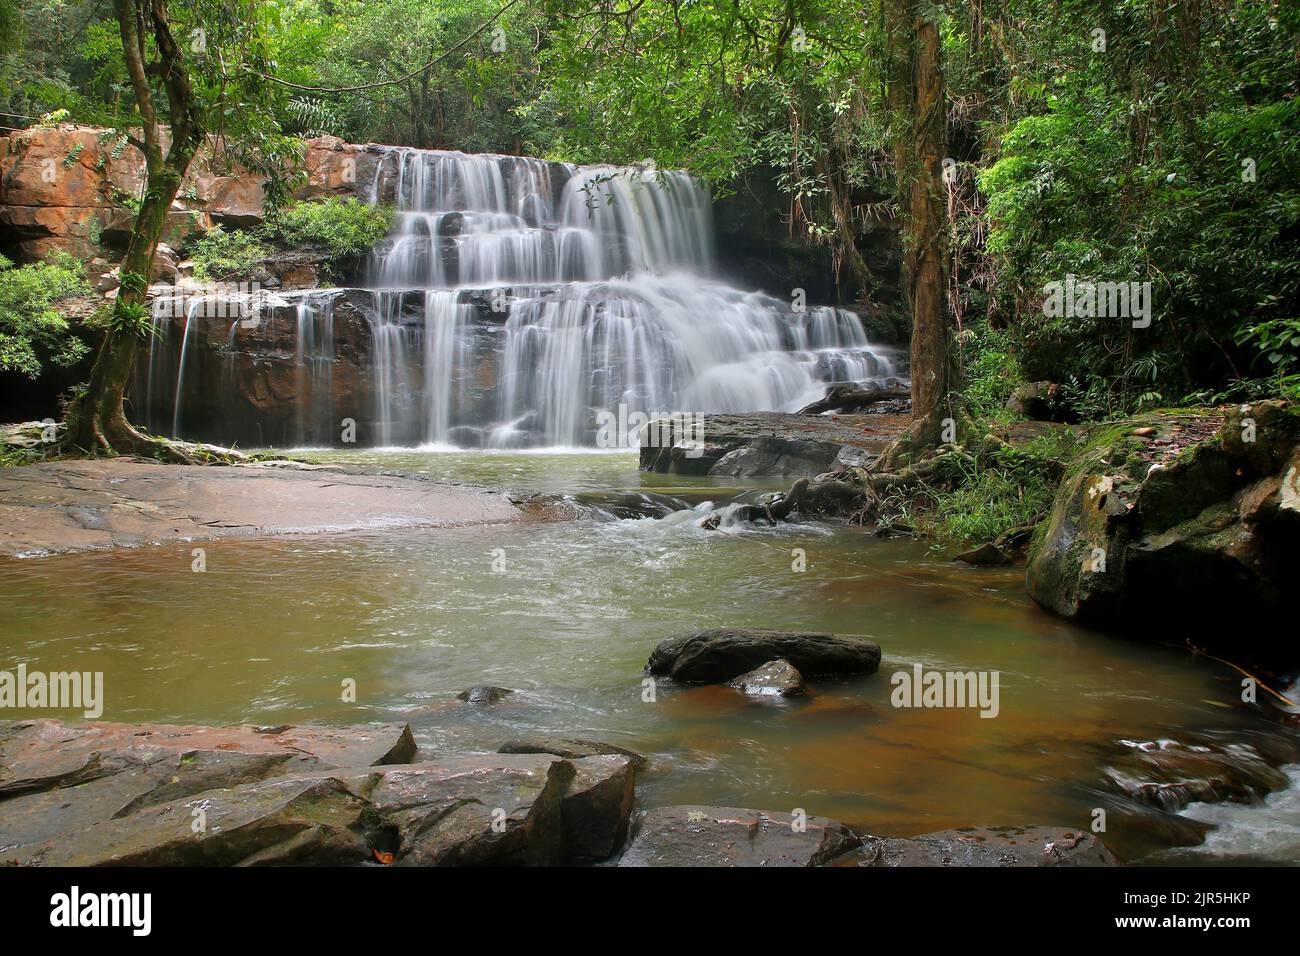 landscape photo, beautiful waterfall in green forest Stock Photo